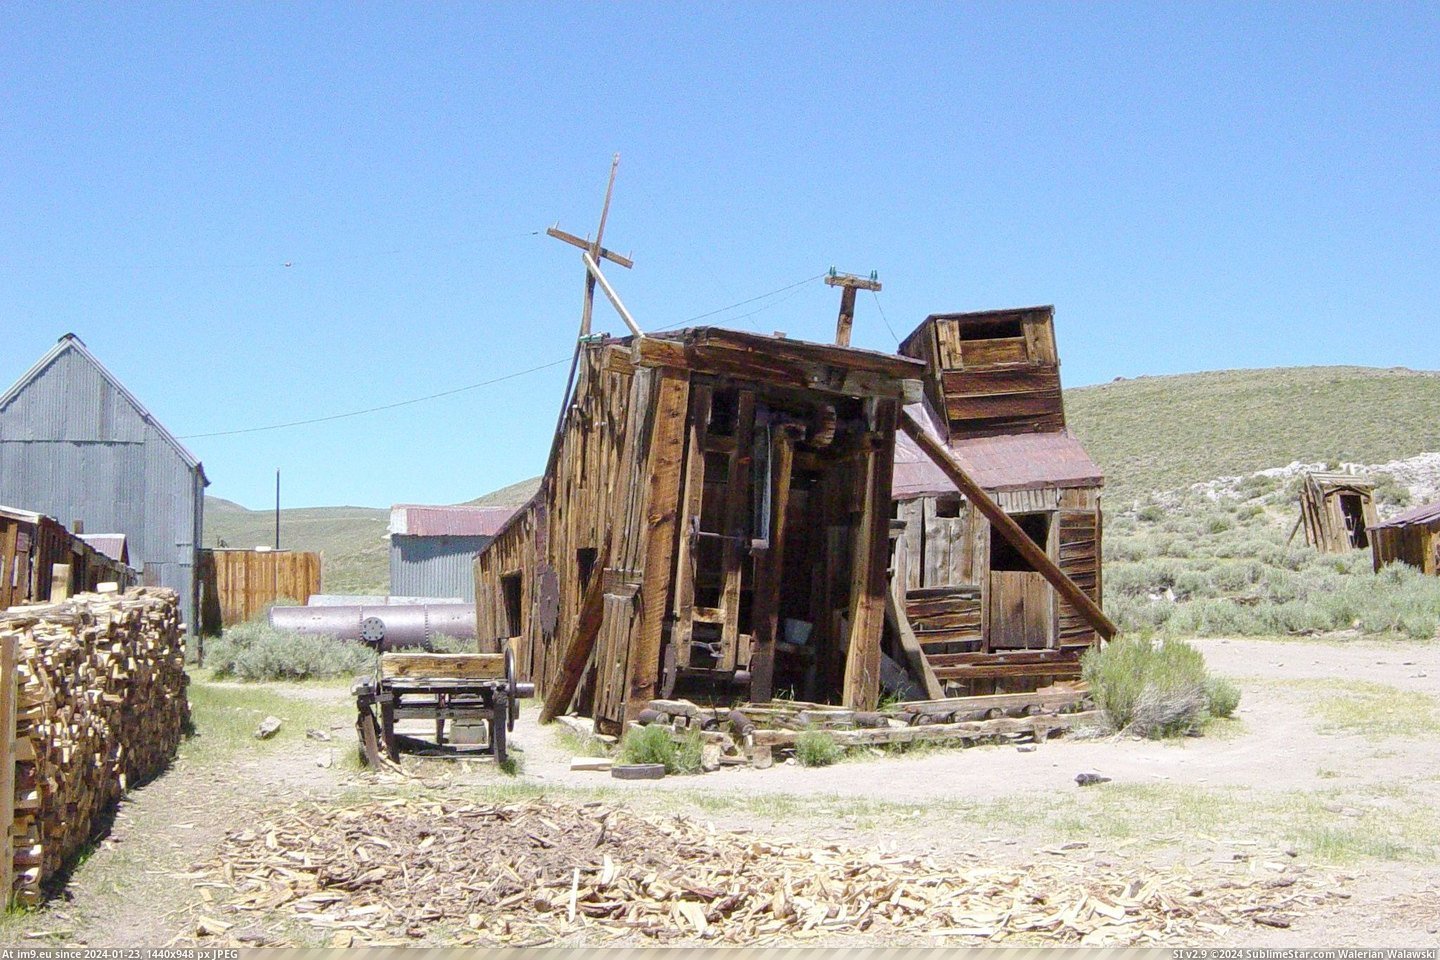 #California #Sawmill #Bodie Sawmill In Bodie, California Pic. (Изображение из альбом Bodie - a ghost town in Eastern California))